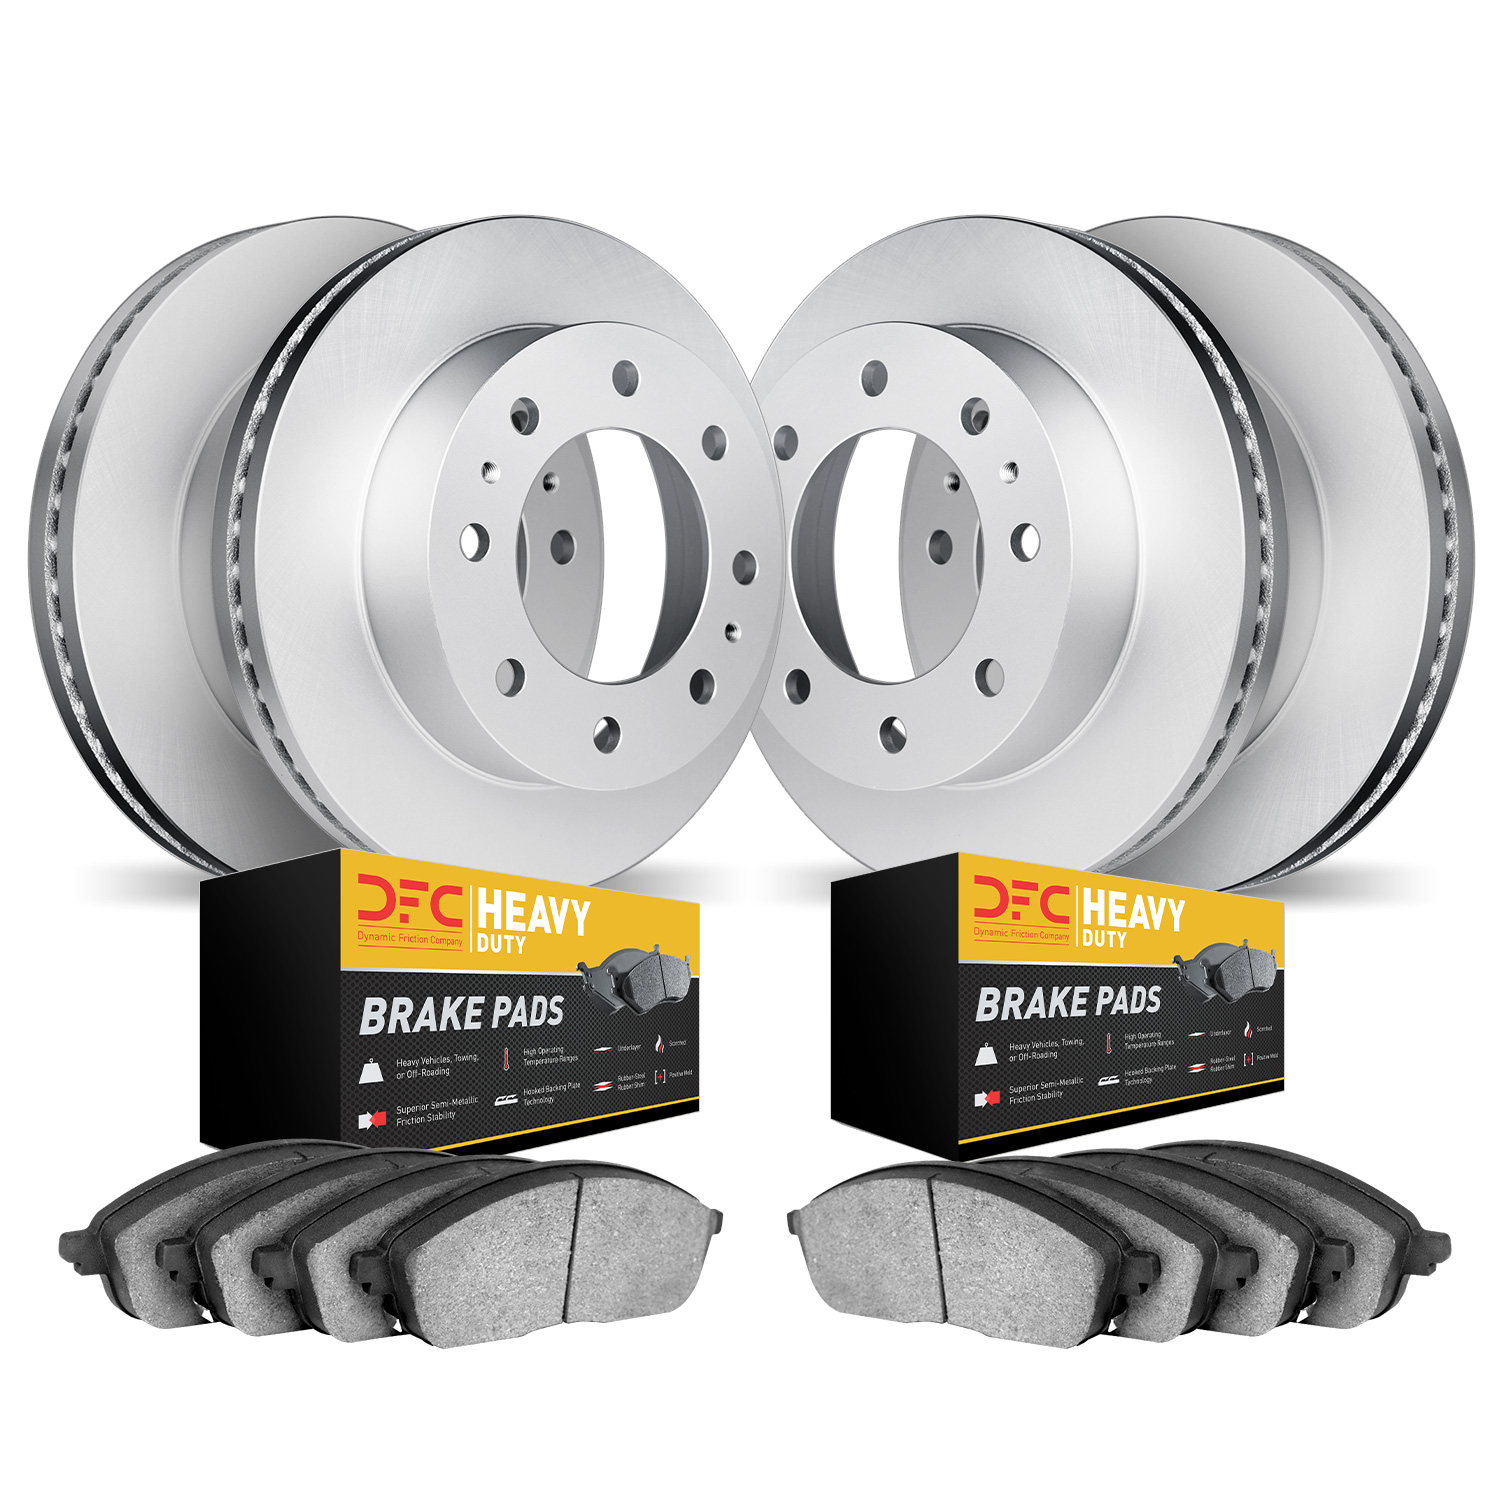 4204-54094 Geospec Brake Rotors w/Heavy-Duty Brake Pads Kit, Fits Select Ford/Lincoln/Mercury/Mazda, Position: Front and Rear